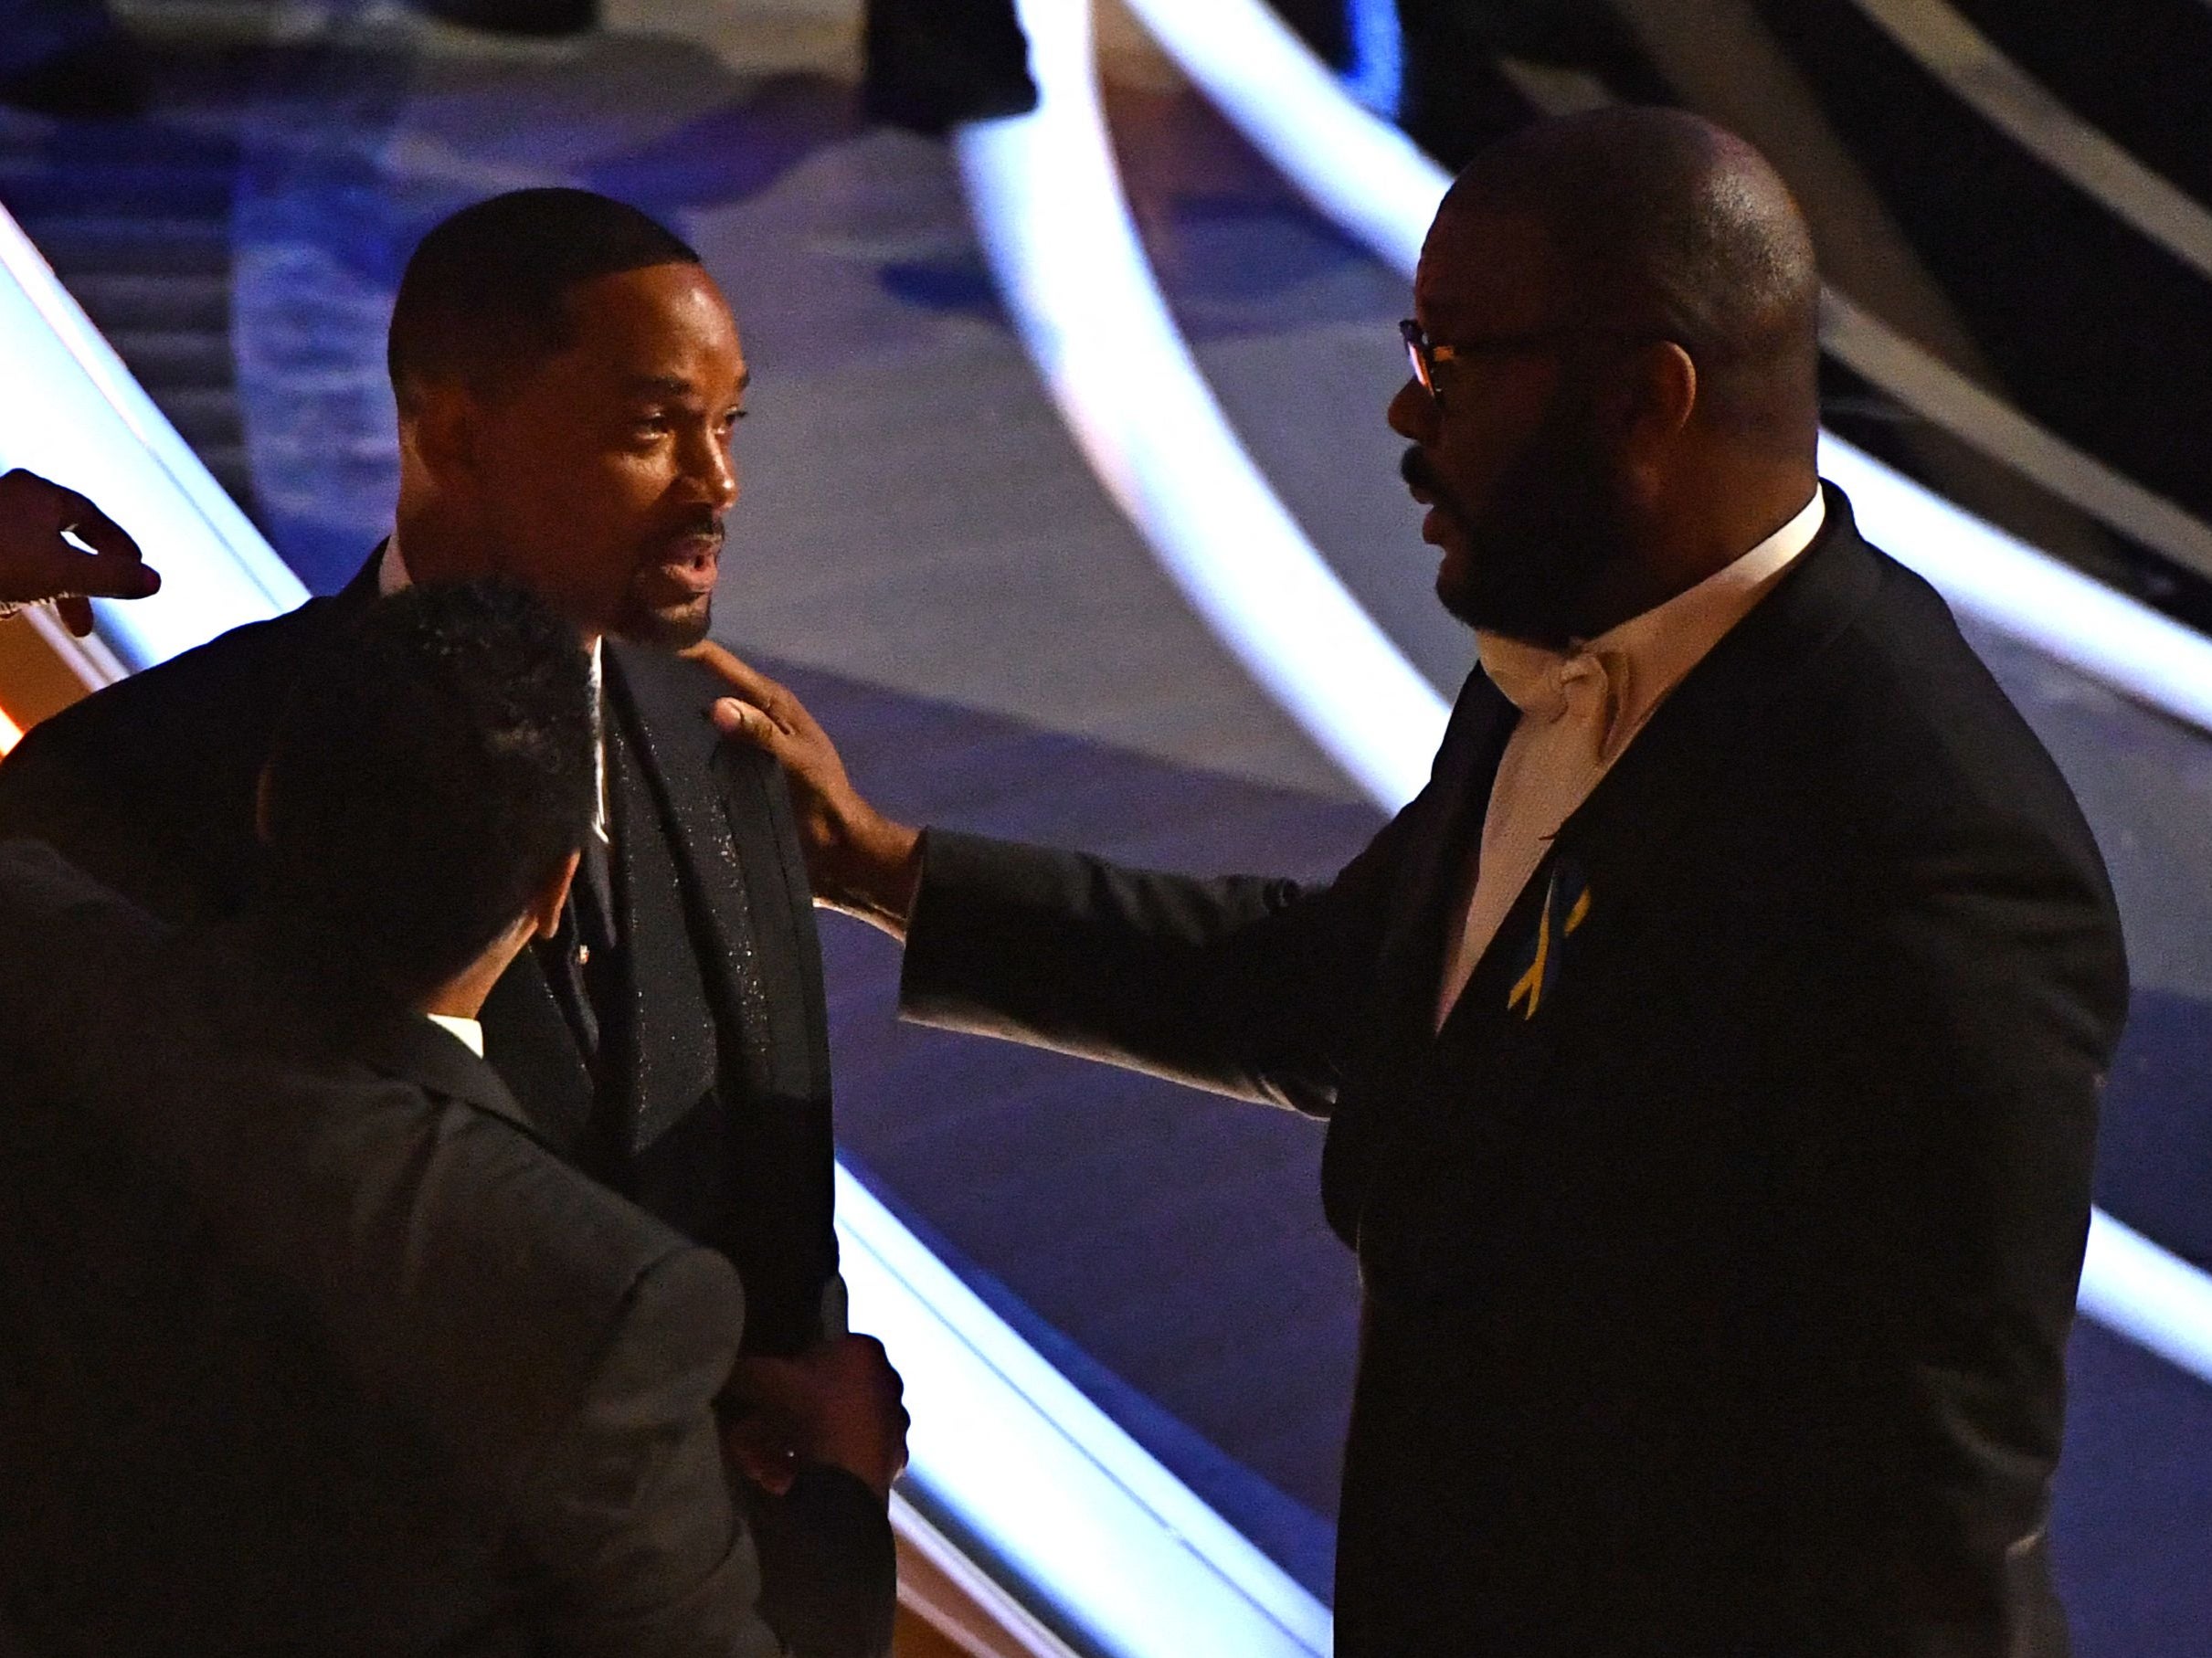 Tyler perry said he ‘de-escalated’ thre situation after Will Smith slapped chris Rock